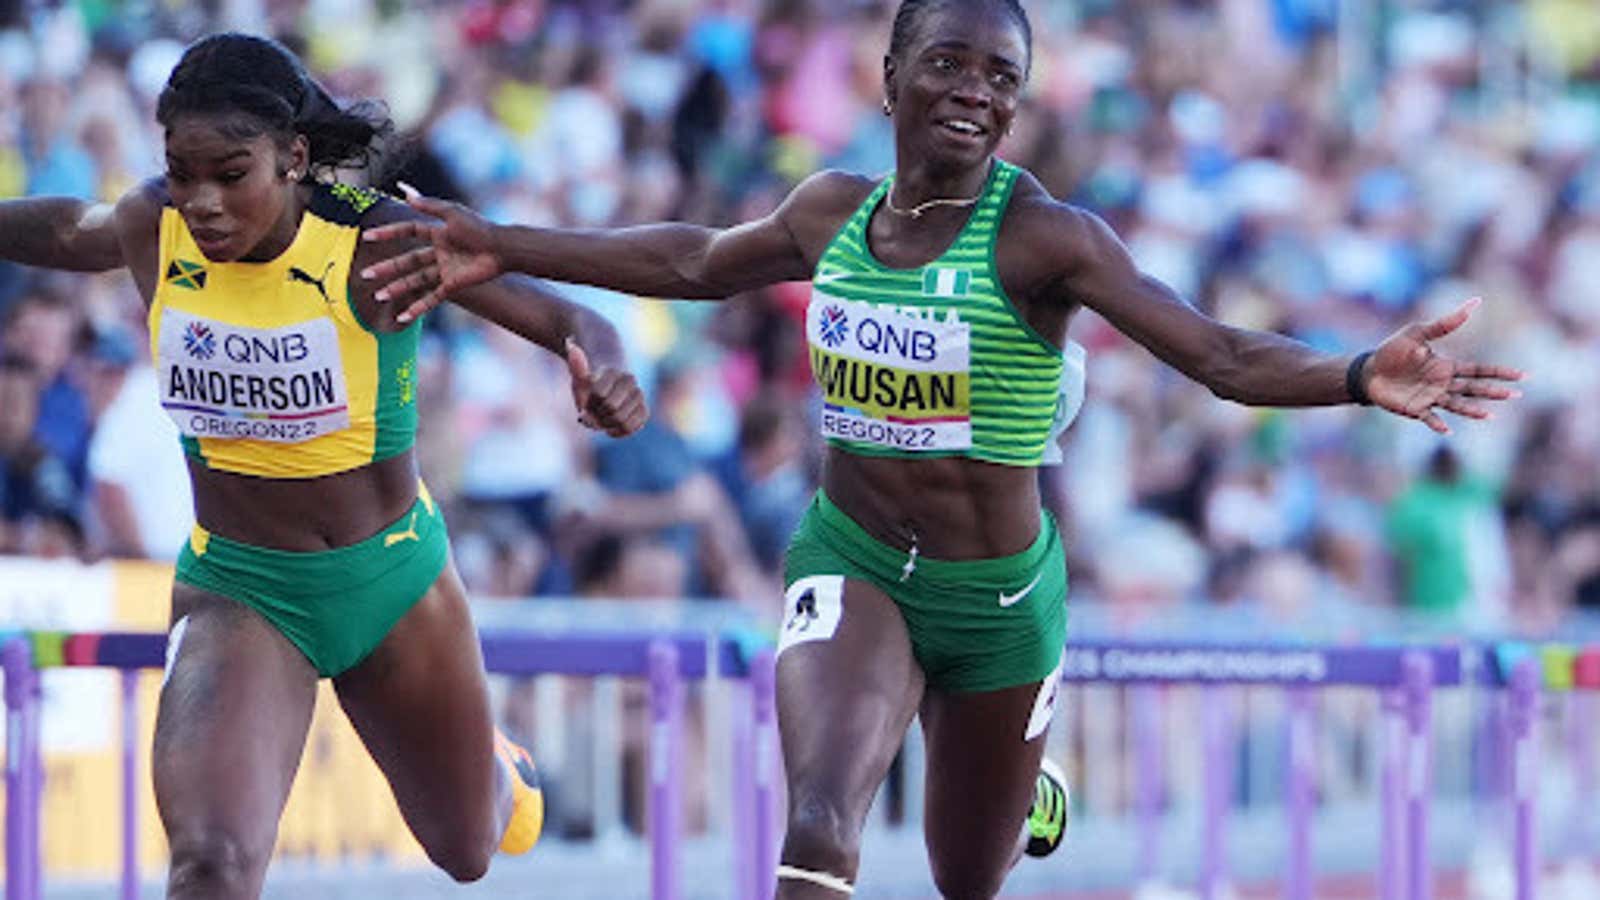 Nigerian runner Tobi Amusan broke the record for the 100m hurdles event of the World Athletics Championships. She had set the previous record in the semi-final.